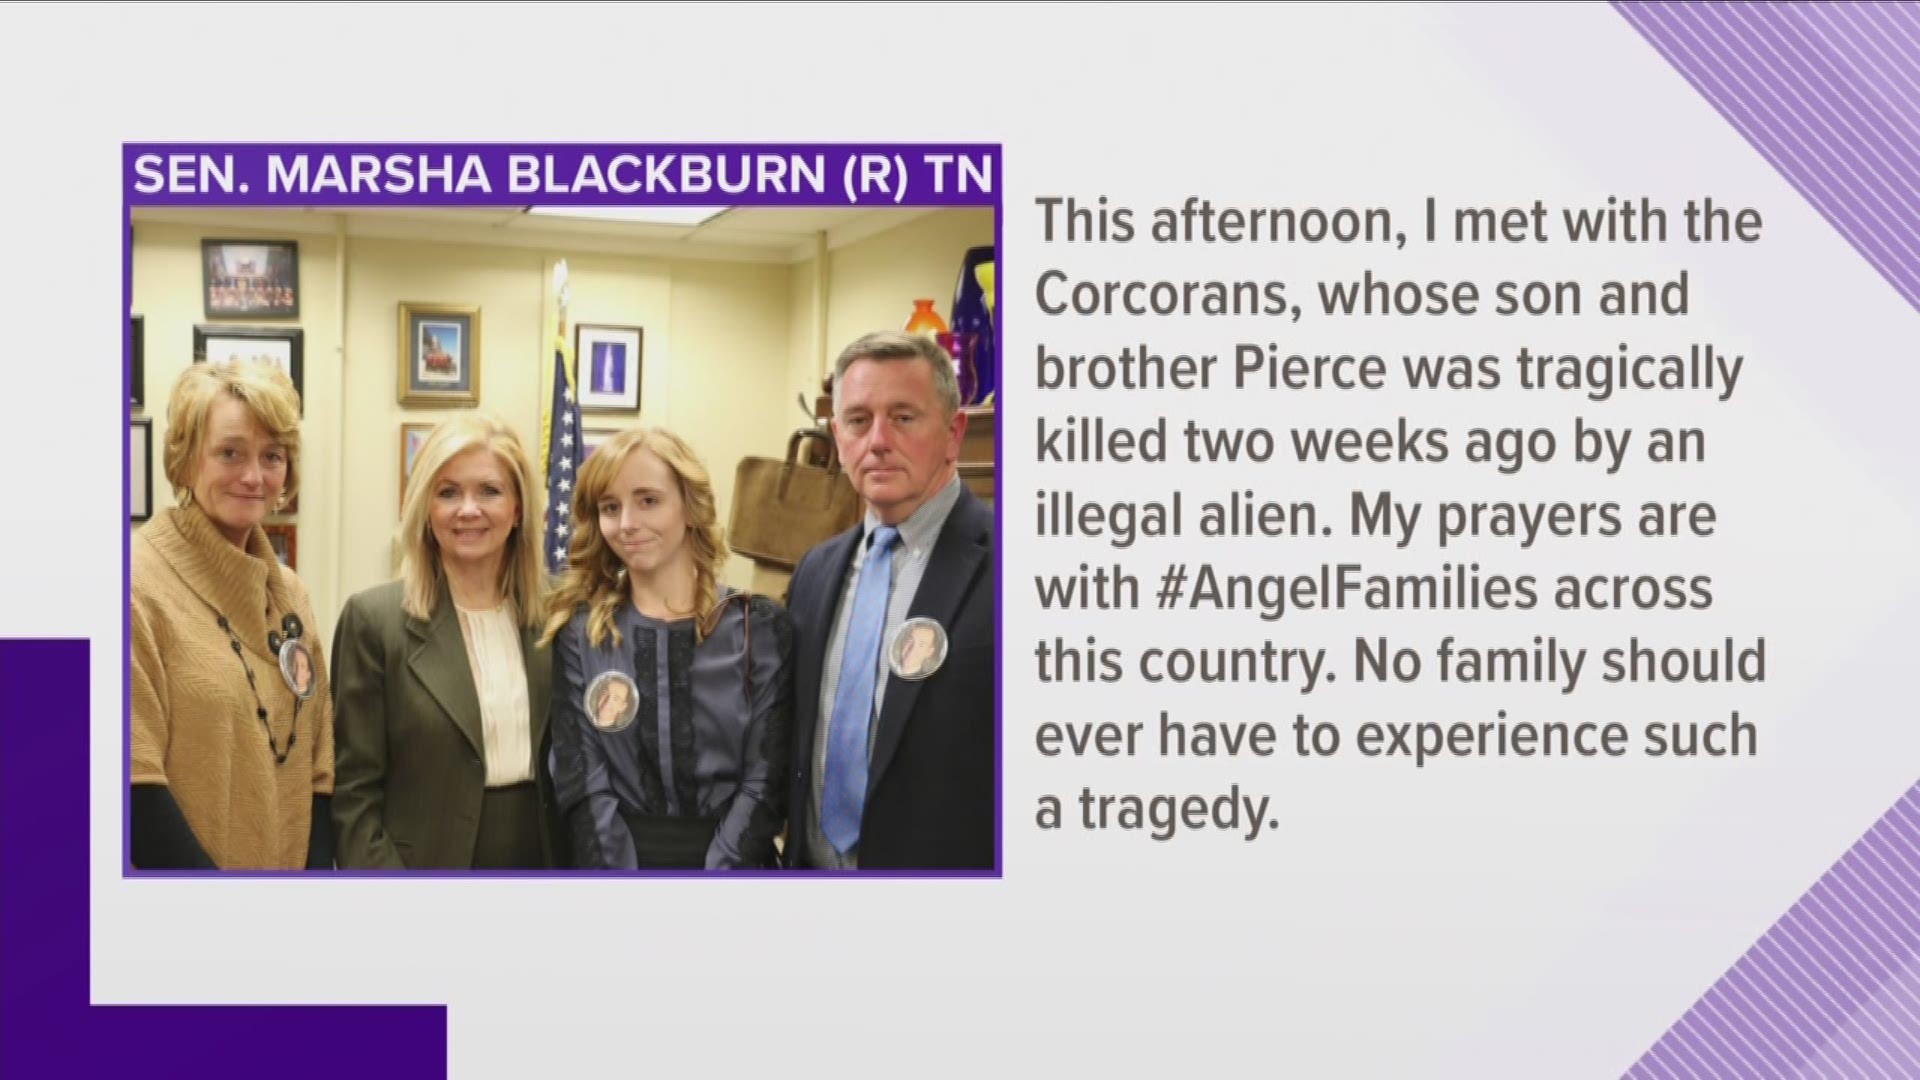 The family of Pierce Corcoran - killed three weeks ago in a crash with a man living in the U.S. illegally - met with Senator Marsha Blackburn today.